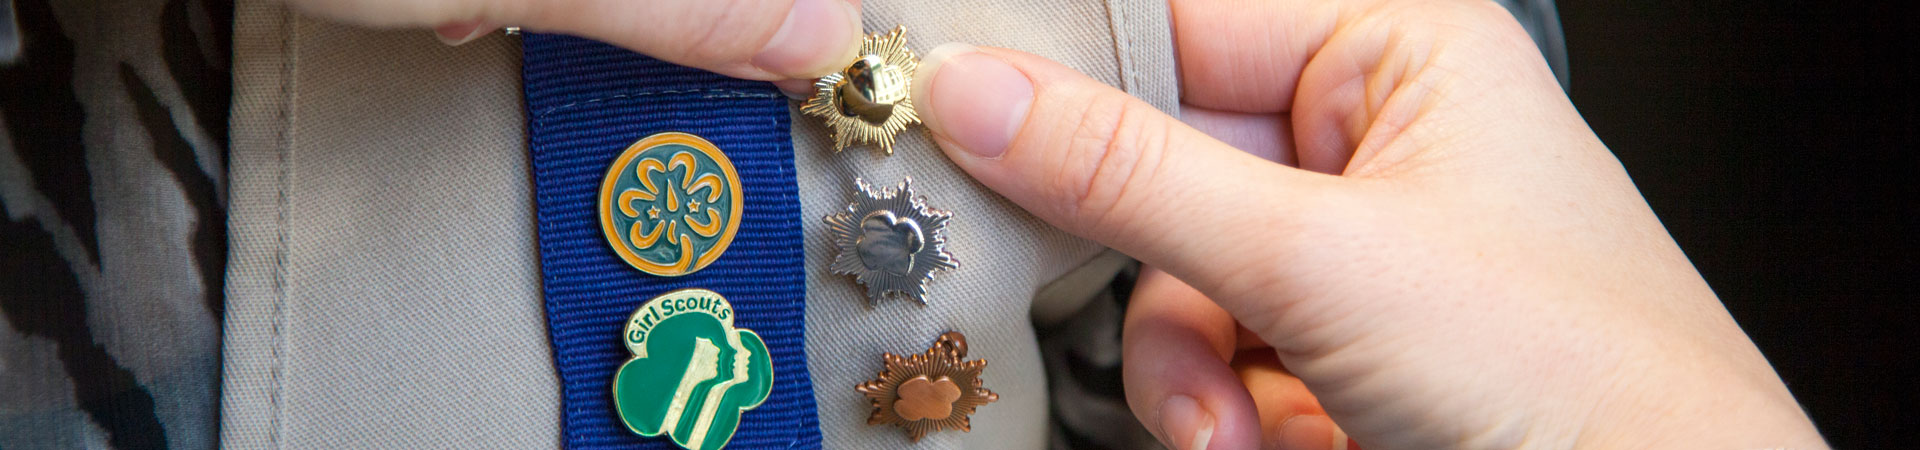  Two hands attaching a pin to a khaki-colored vest embellished with other Girl Scout pins. 